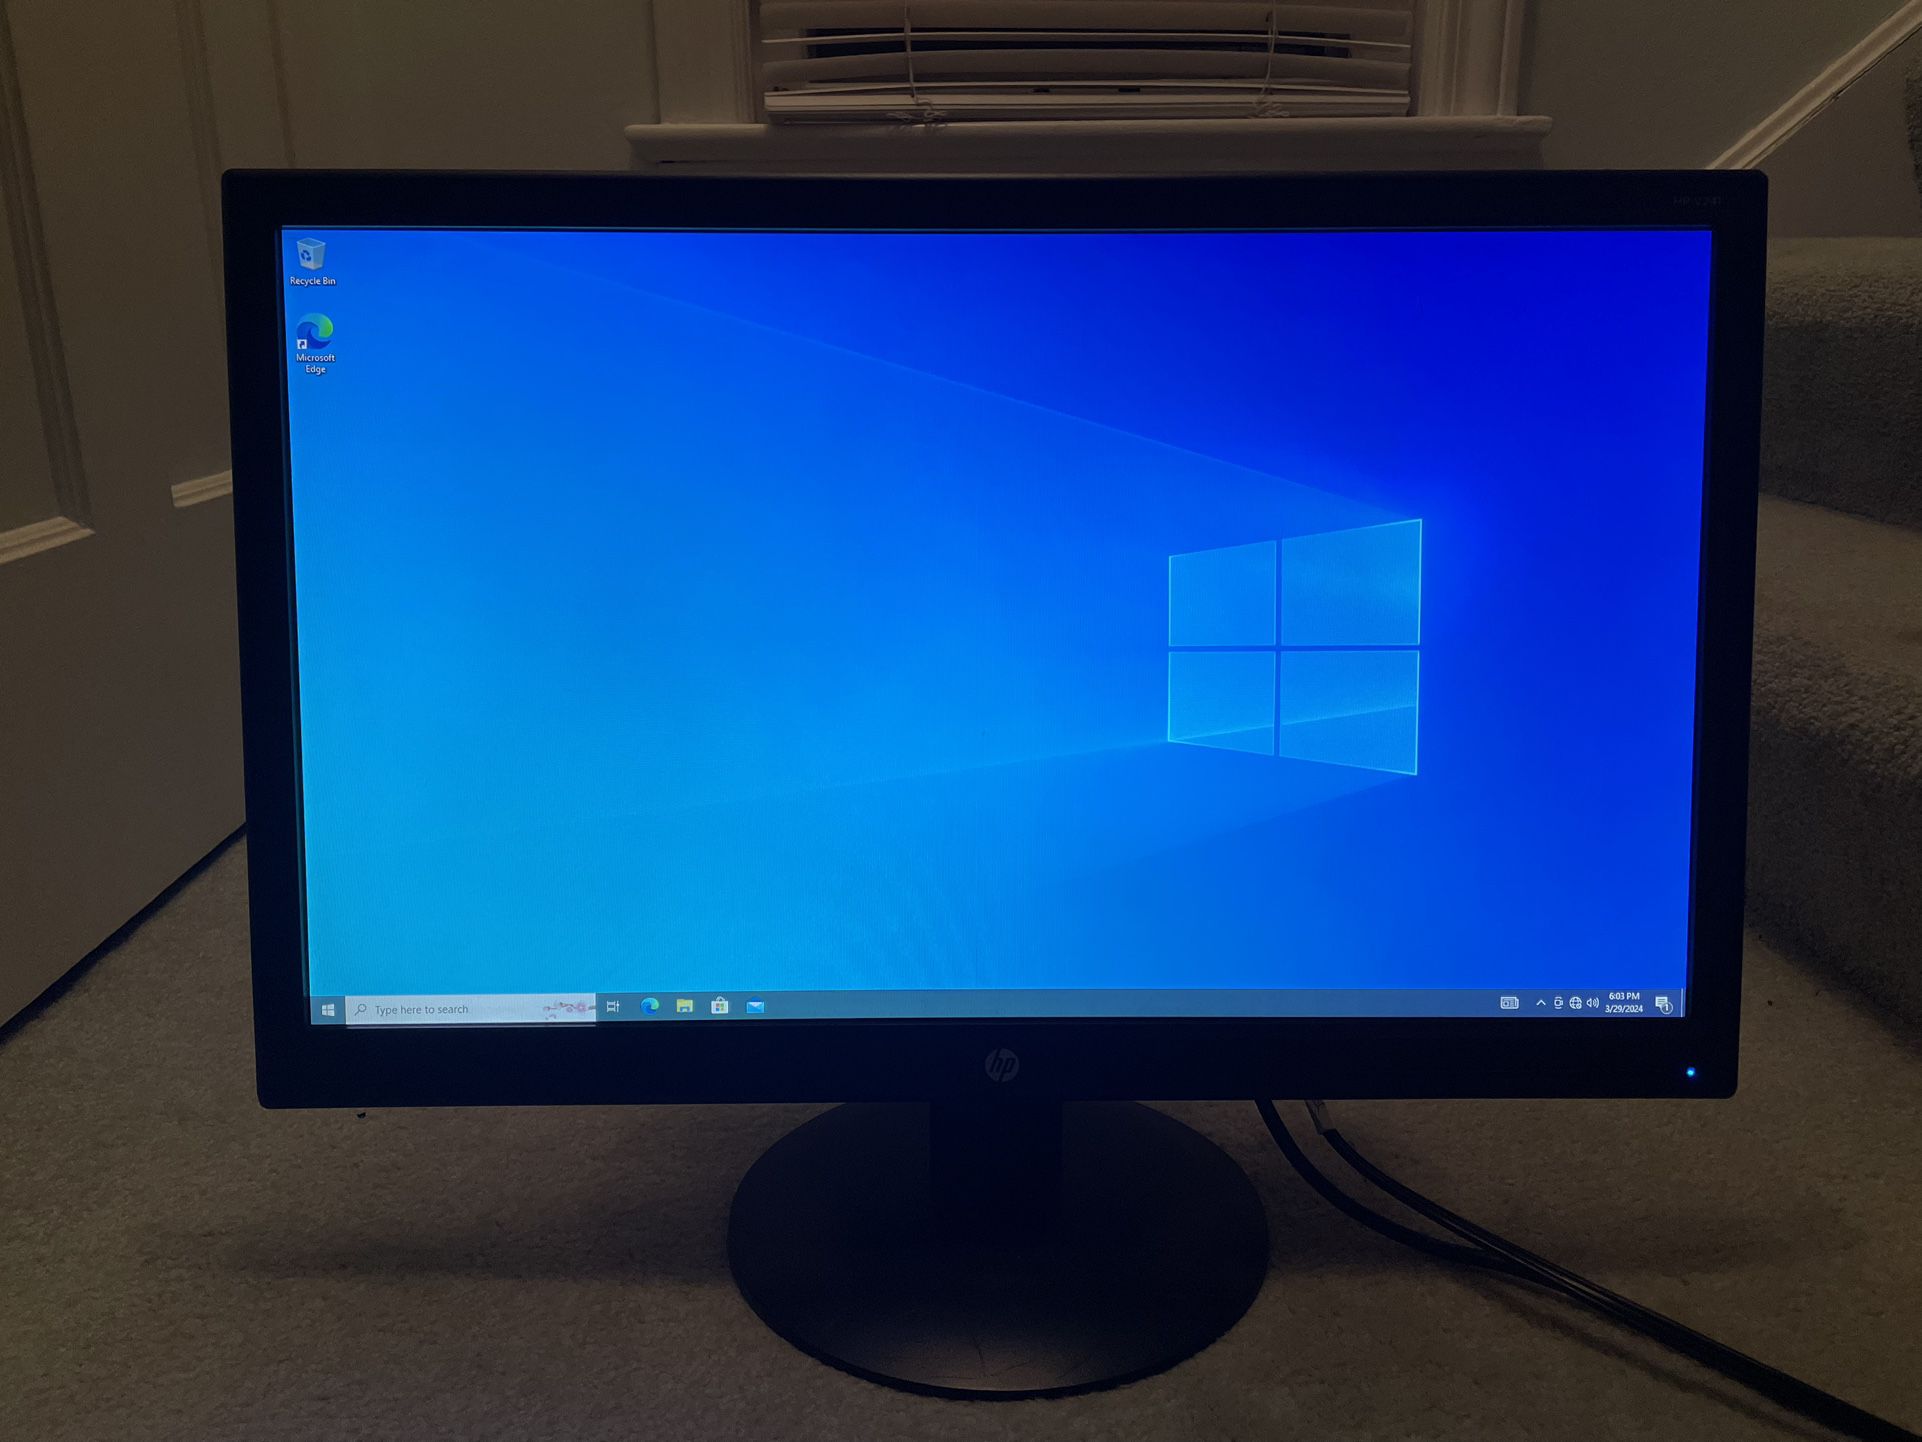 HP EliteDesk 800 G1 with 24in Monitor